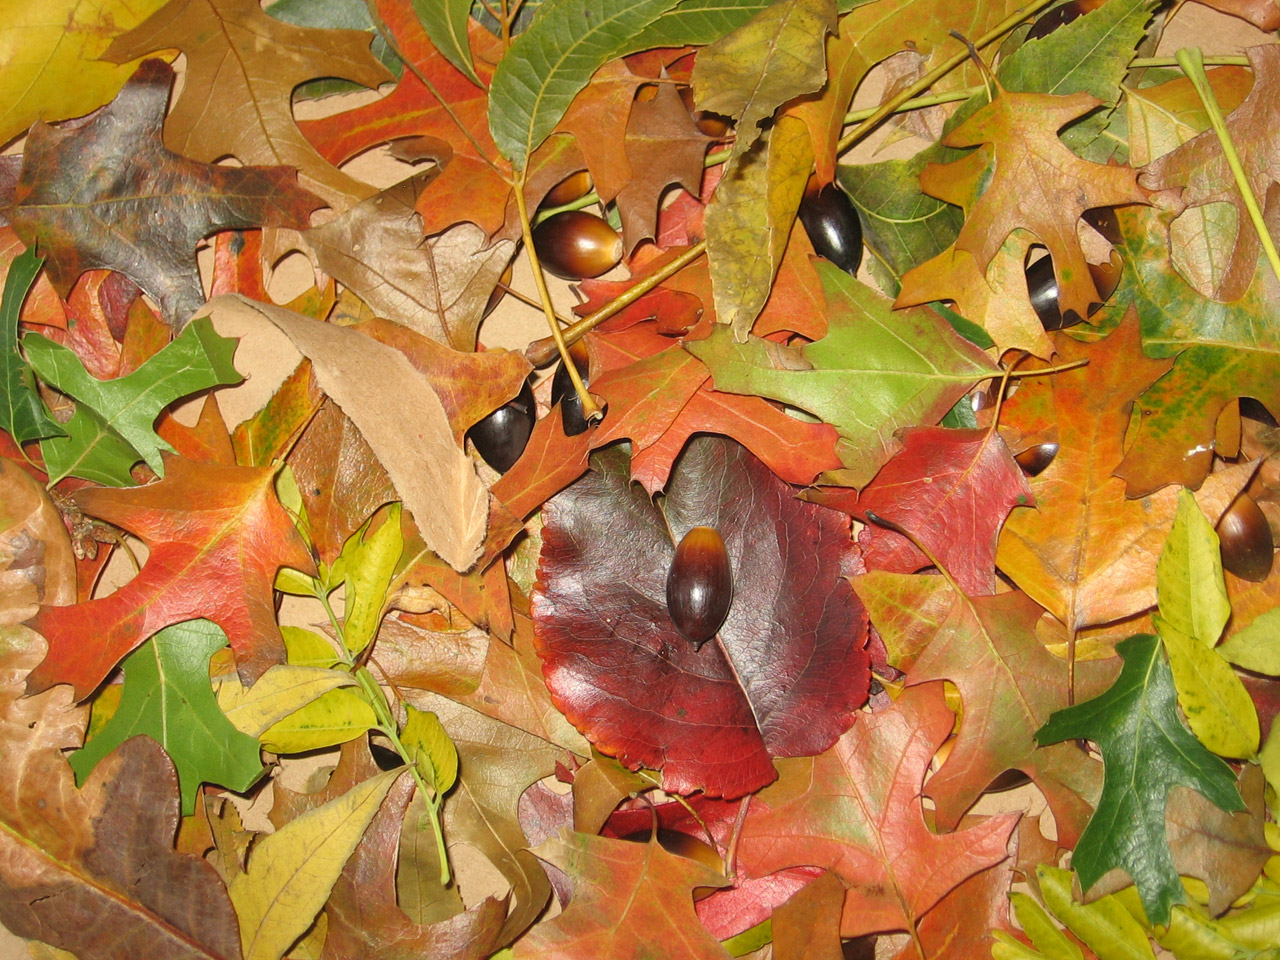 Many different kinds of colorful leaves with some acorns.